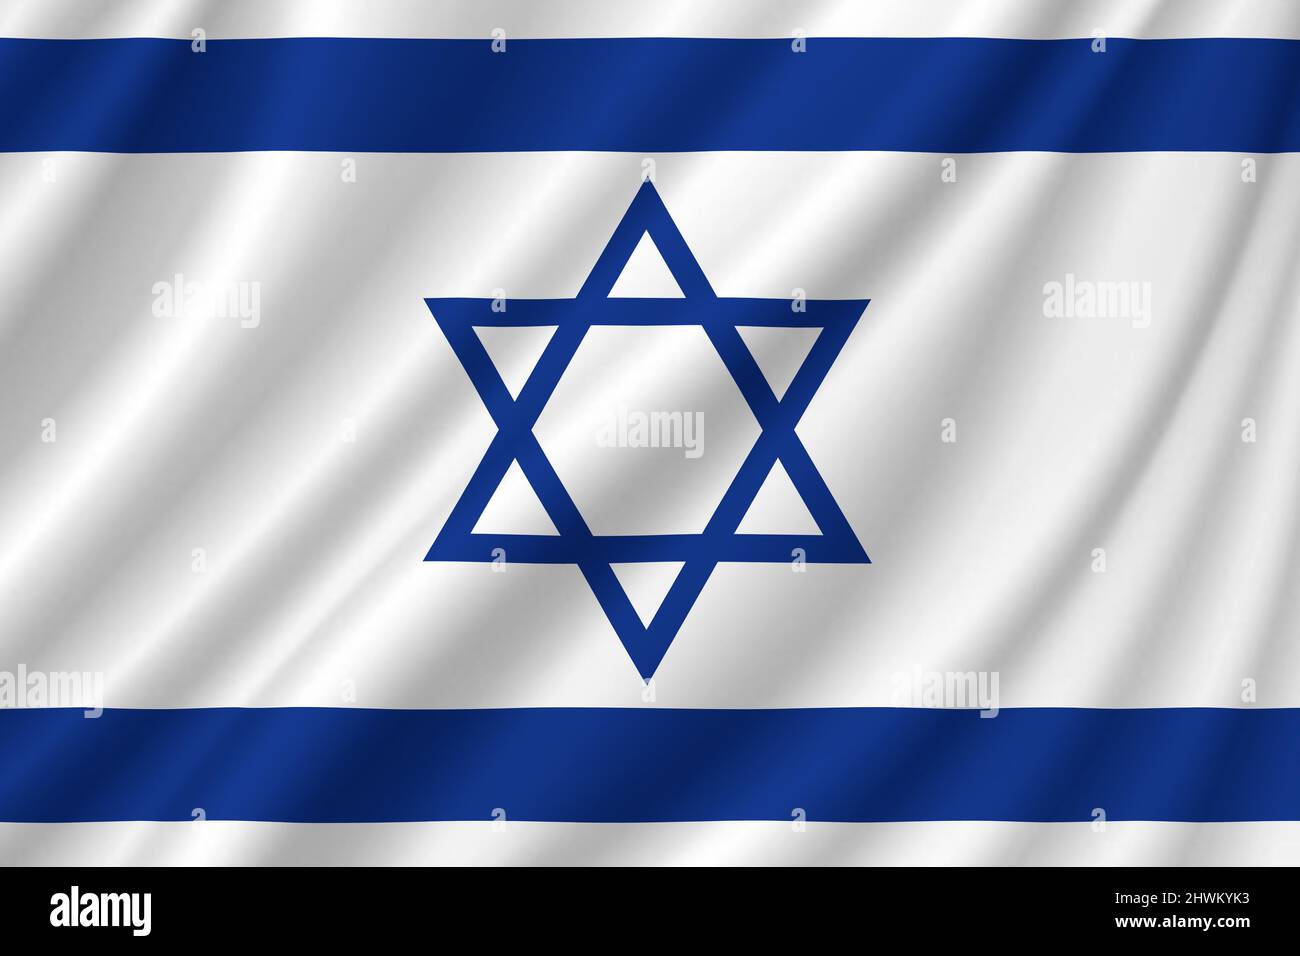 Israel. Illustration of the flag of Israel with ripples. Horizontal design. Illustration. Map. Stock Photo